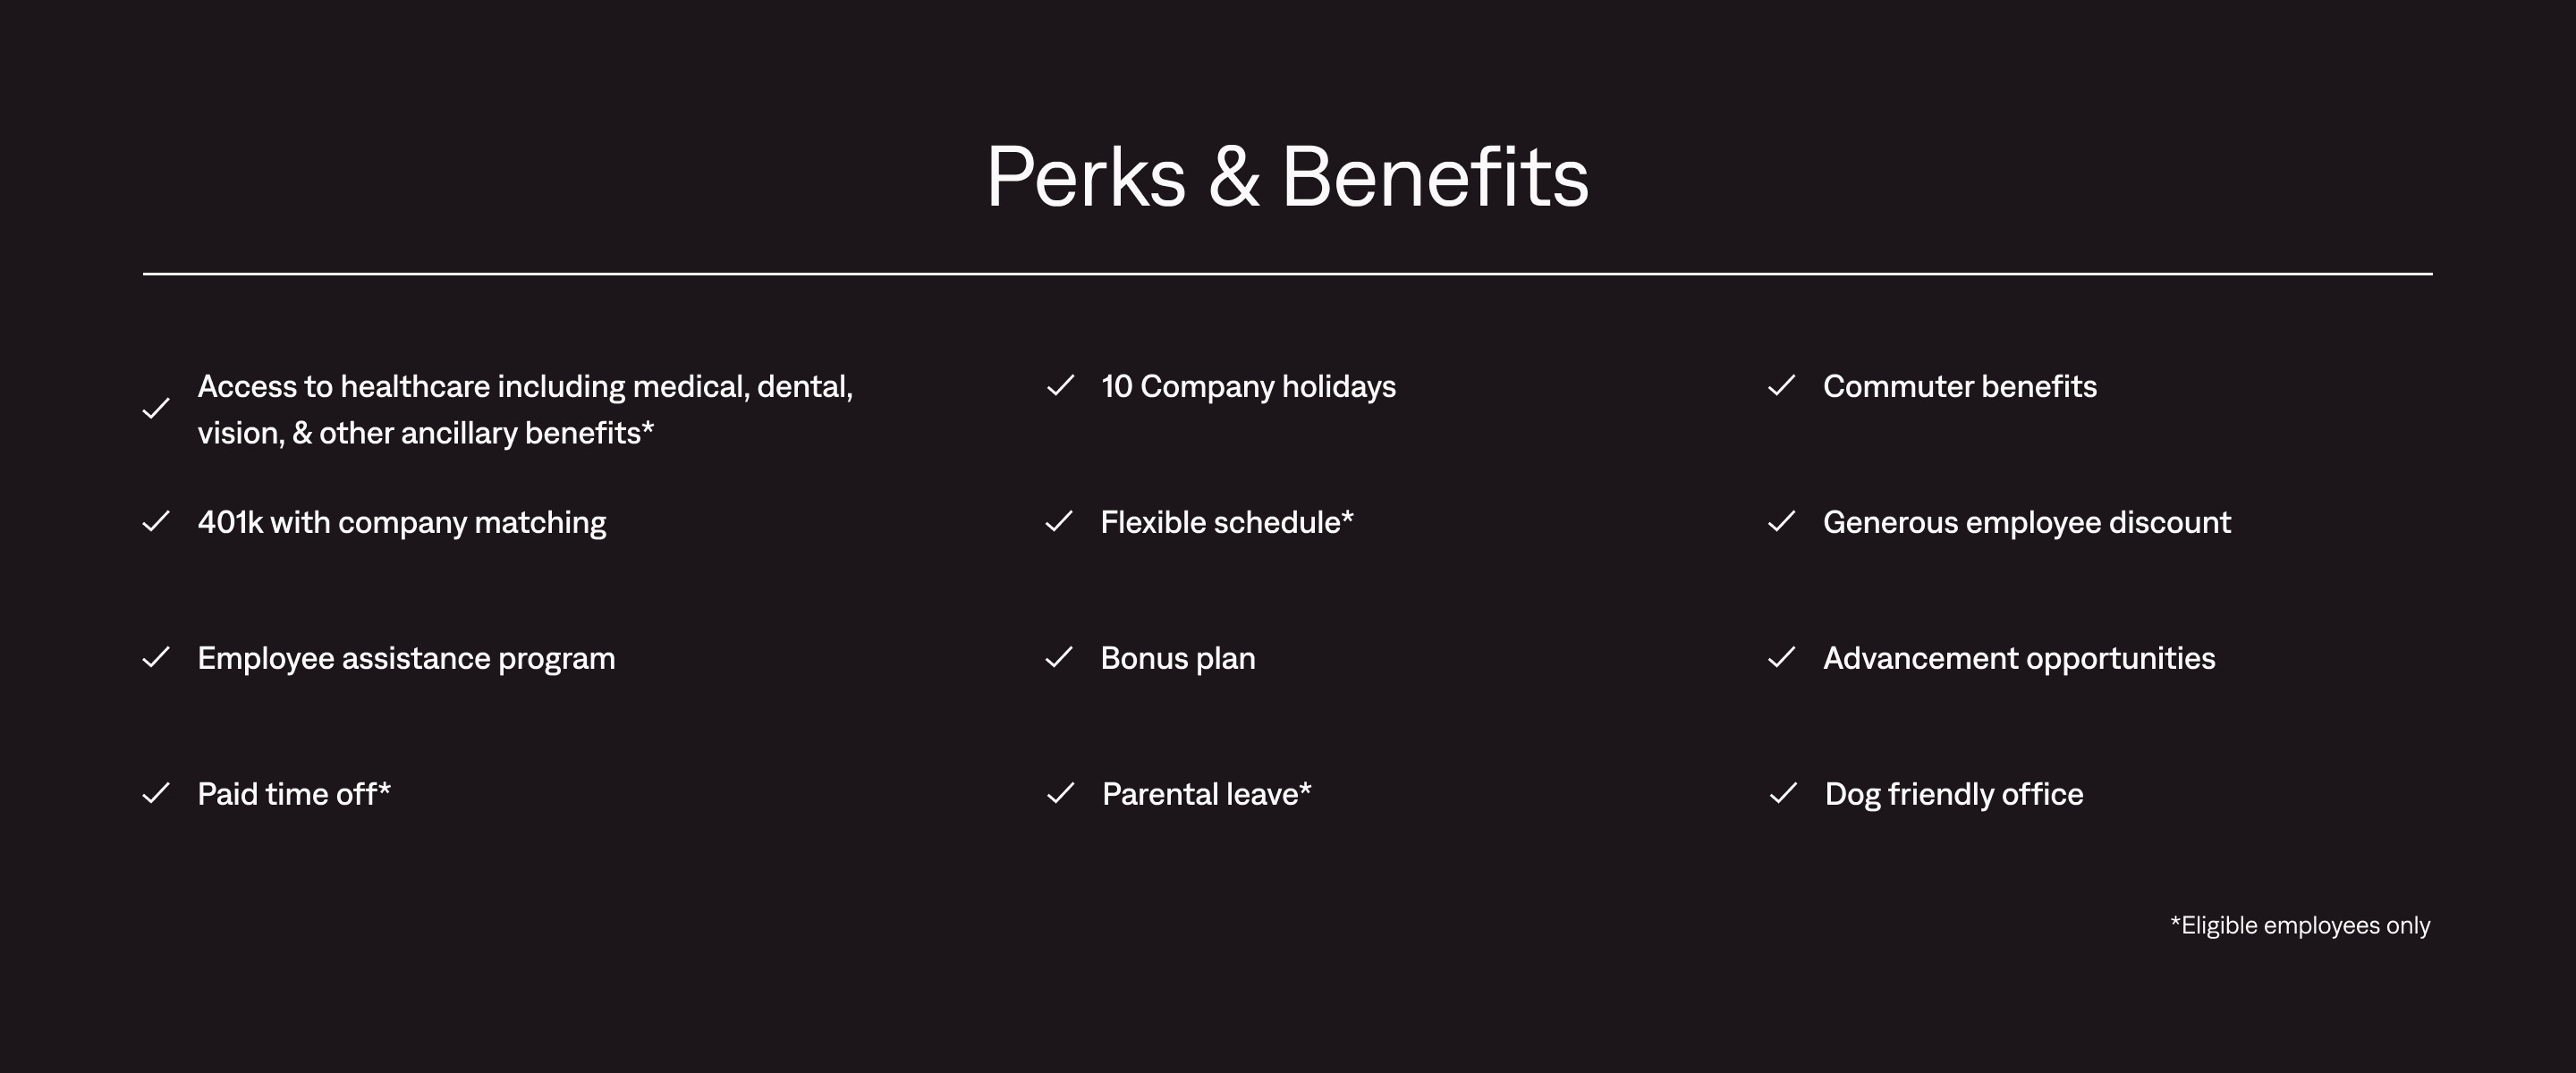 Perks and Benefits